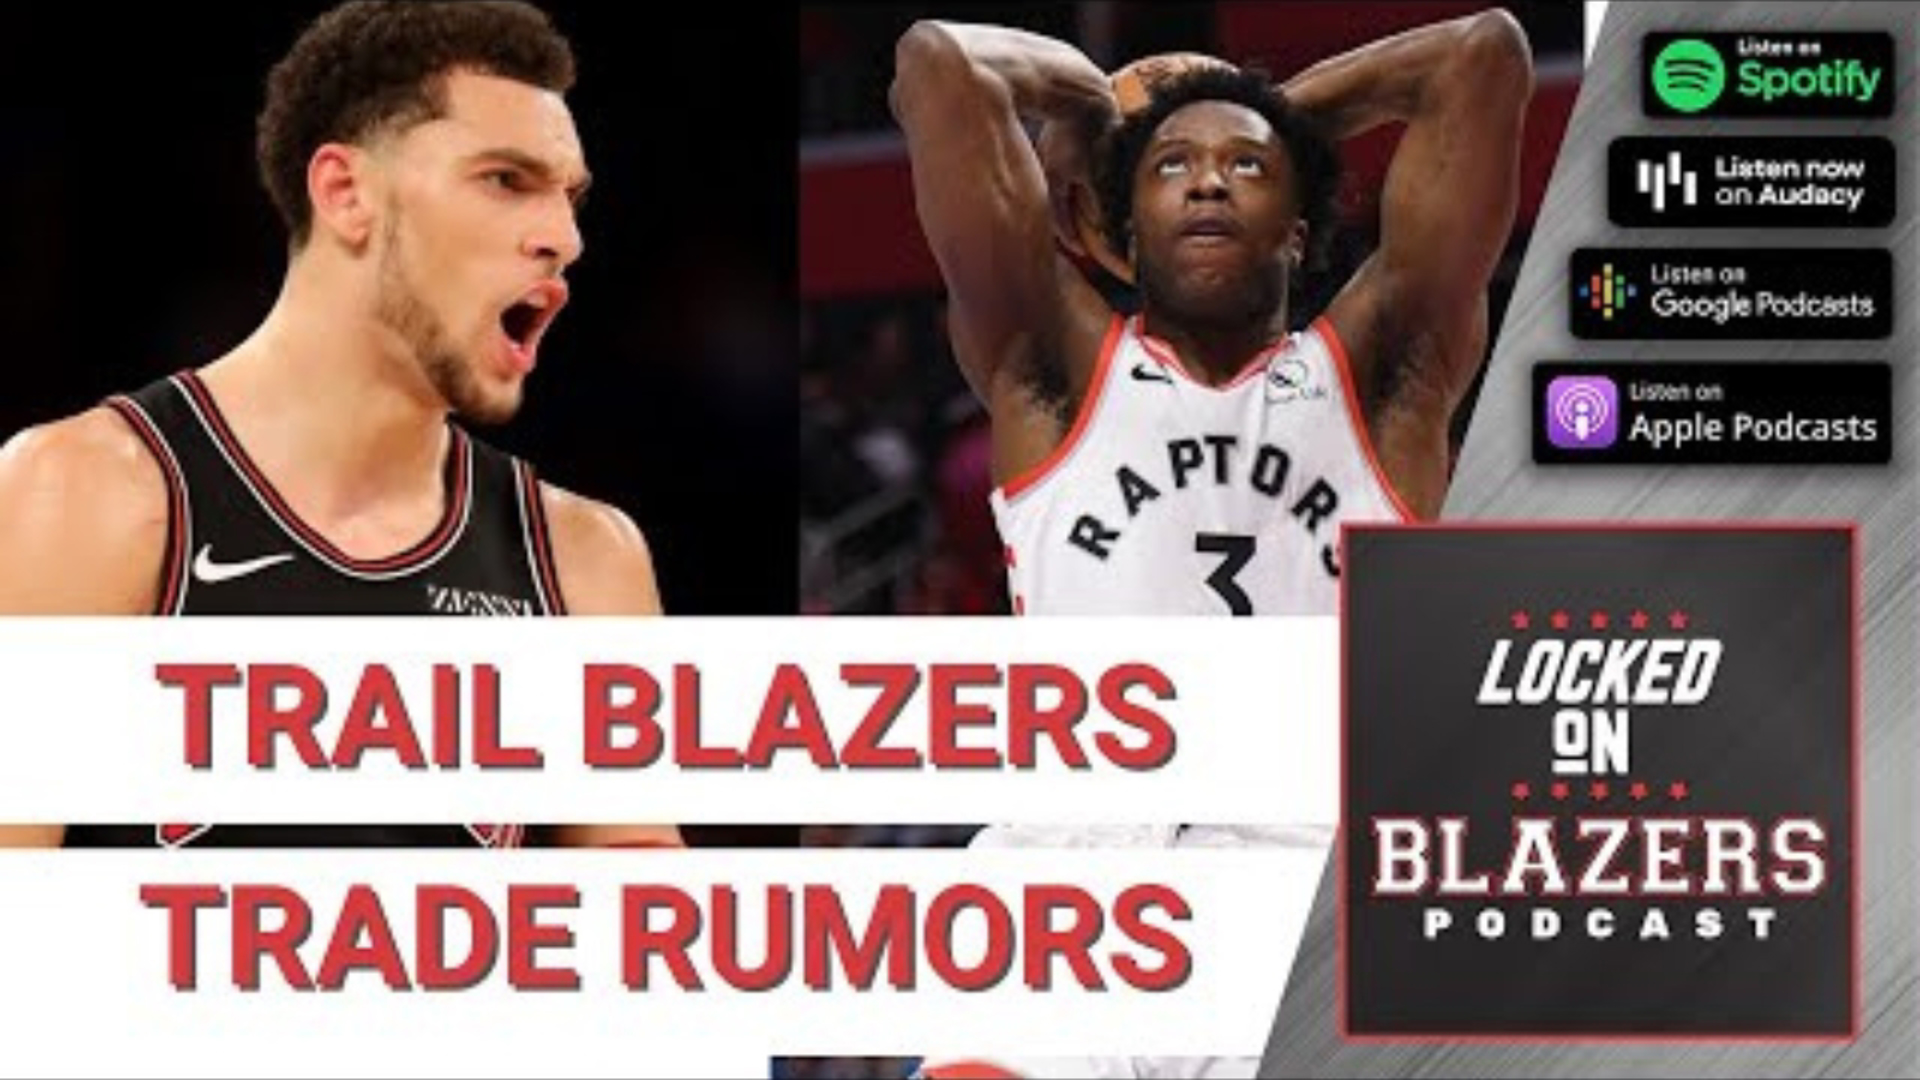 Is Portland a realistic landing spot for Zach LaVine or Bradley Beal? Is OG Anunoby a realistic target if Portland shops No. 7? Will Portland keep its draft pick?